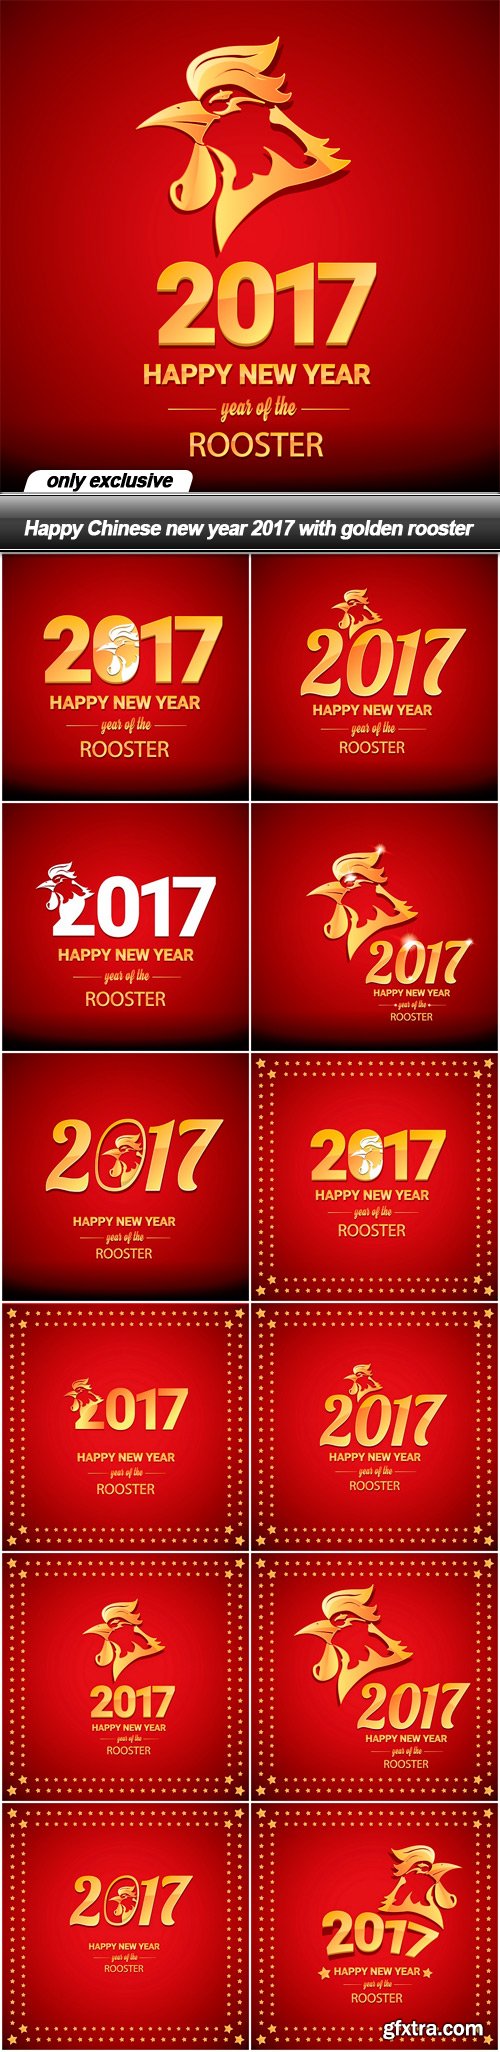 Happy Chinese new year 2017 with golden rooster - 13 EPS